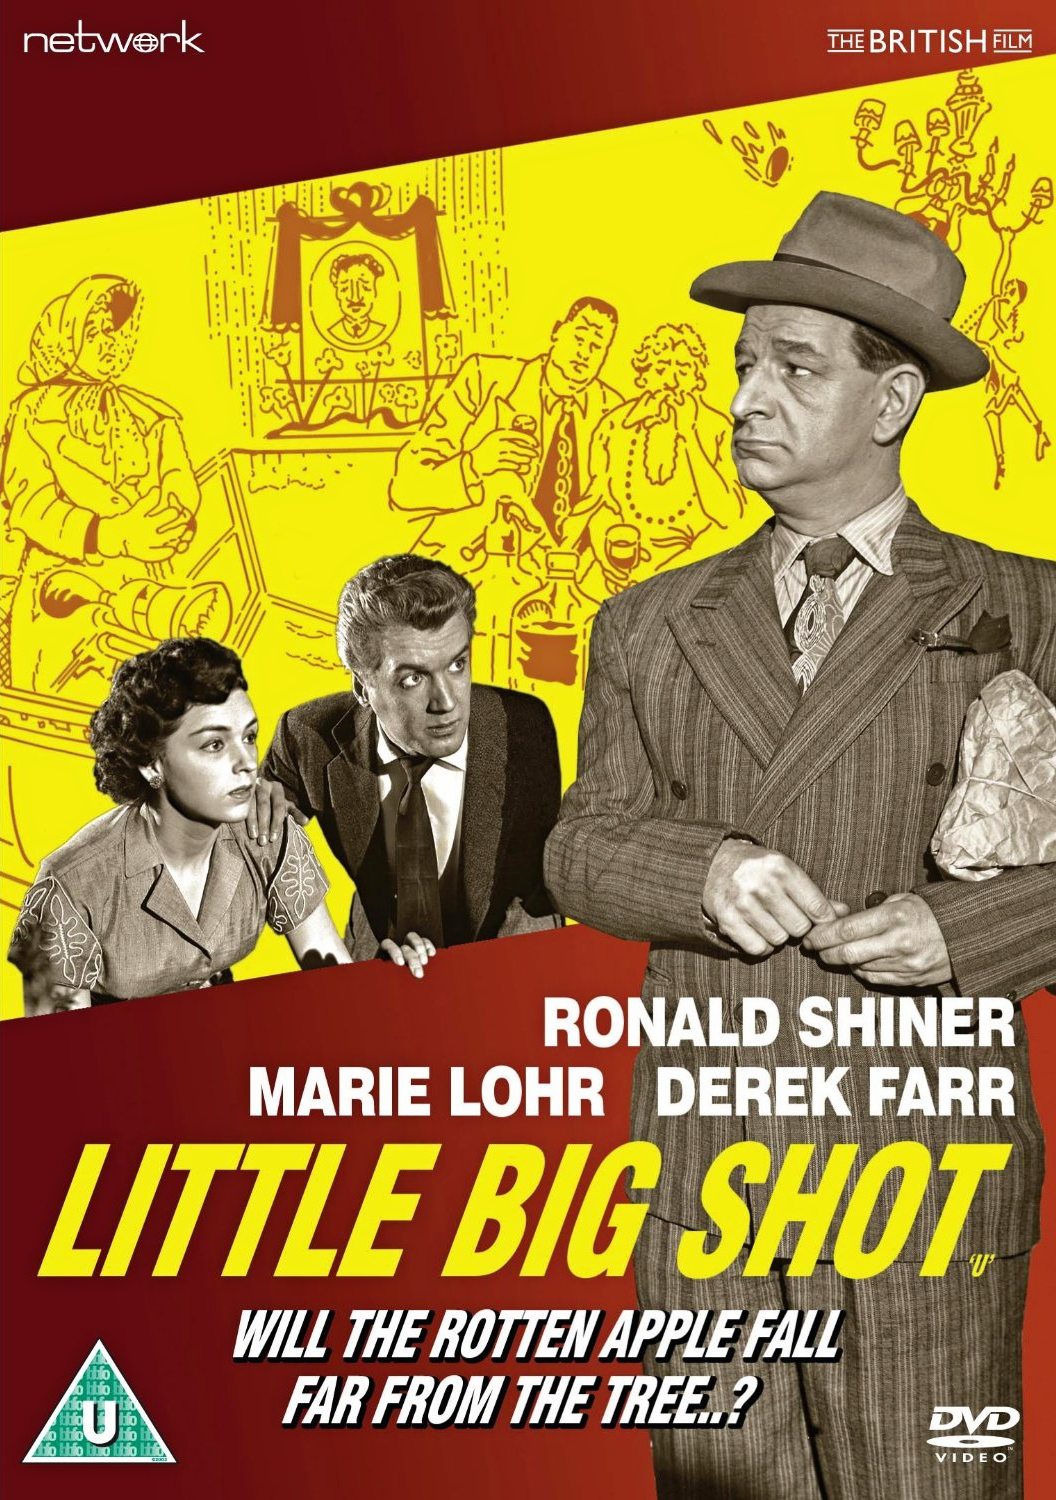 Little Big Shot DVD from Network and The British Film